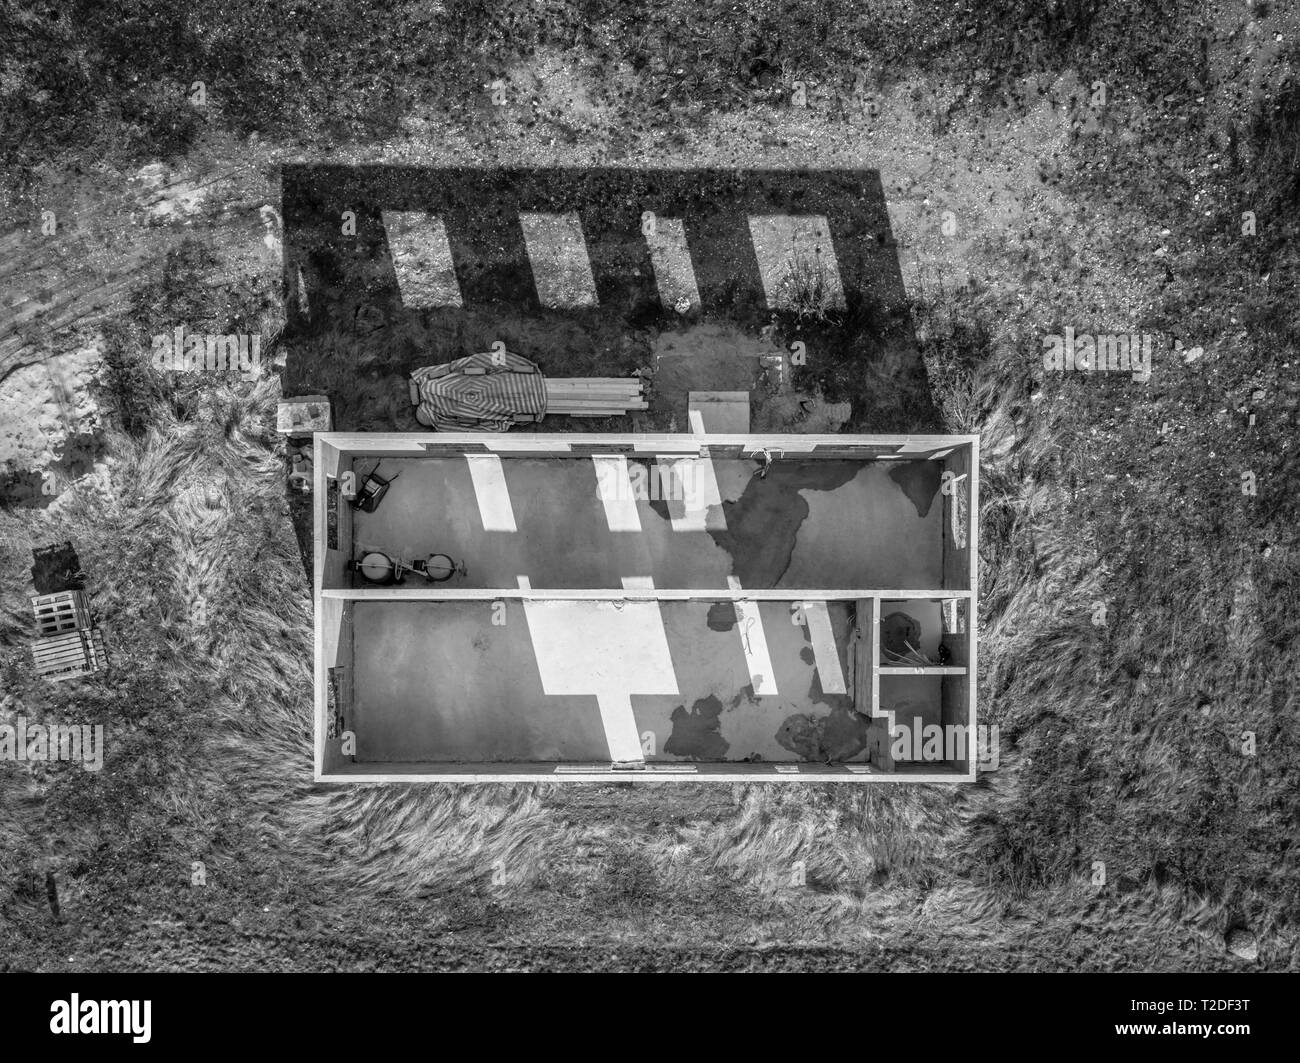 Box, Building structure, aerial view of a building, dronephoto, black and white, B/W, aerophoto, Vertical view from a great height of a building Stock Photo